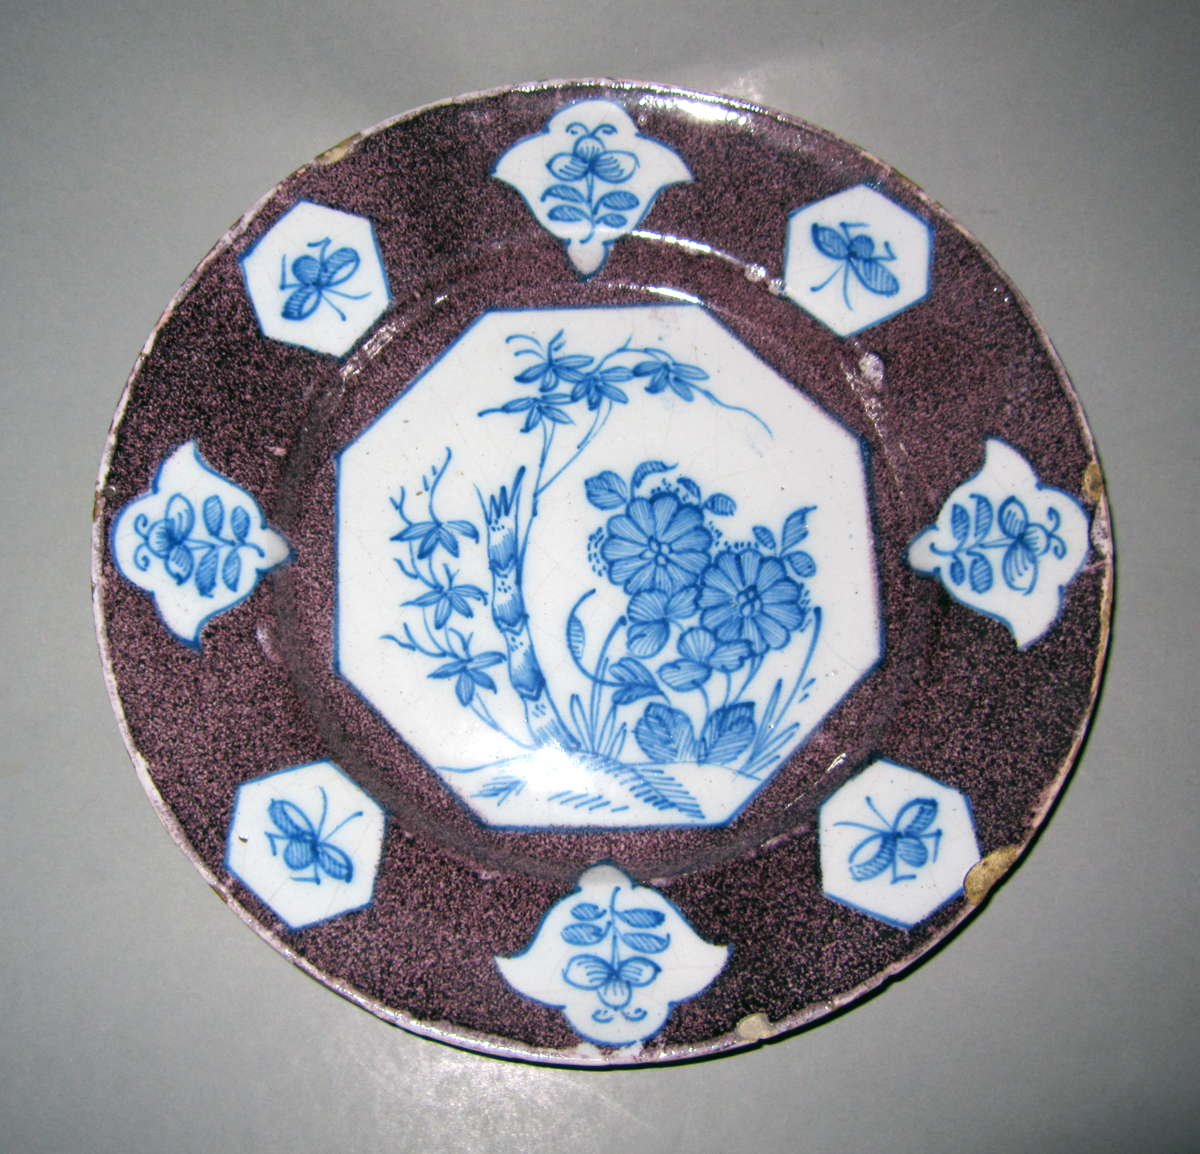 2003.0022.090 Delft plate or dinner plate